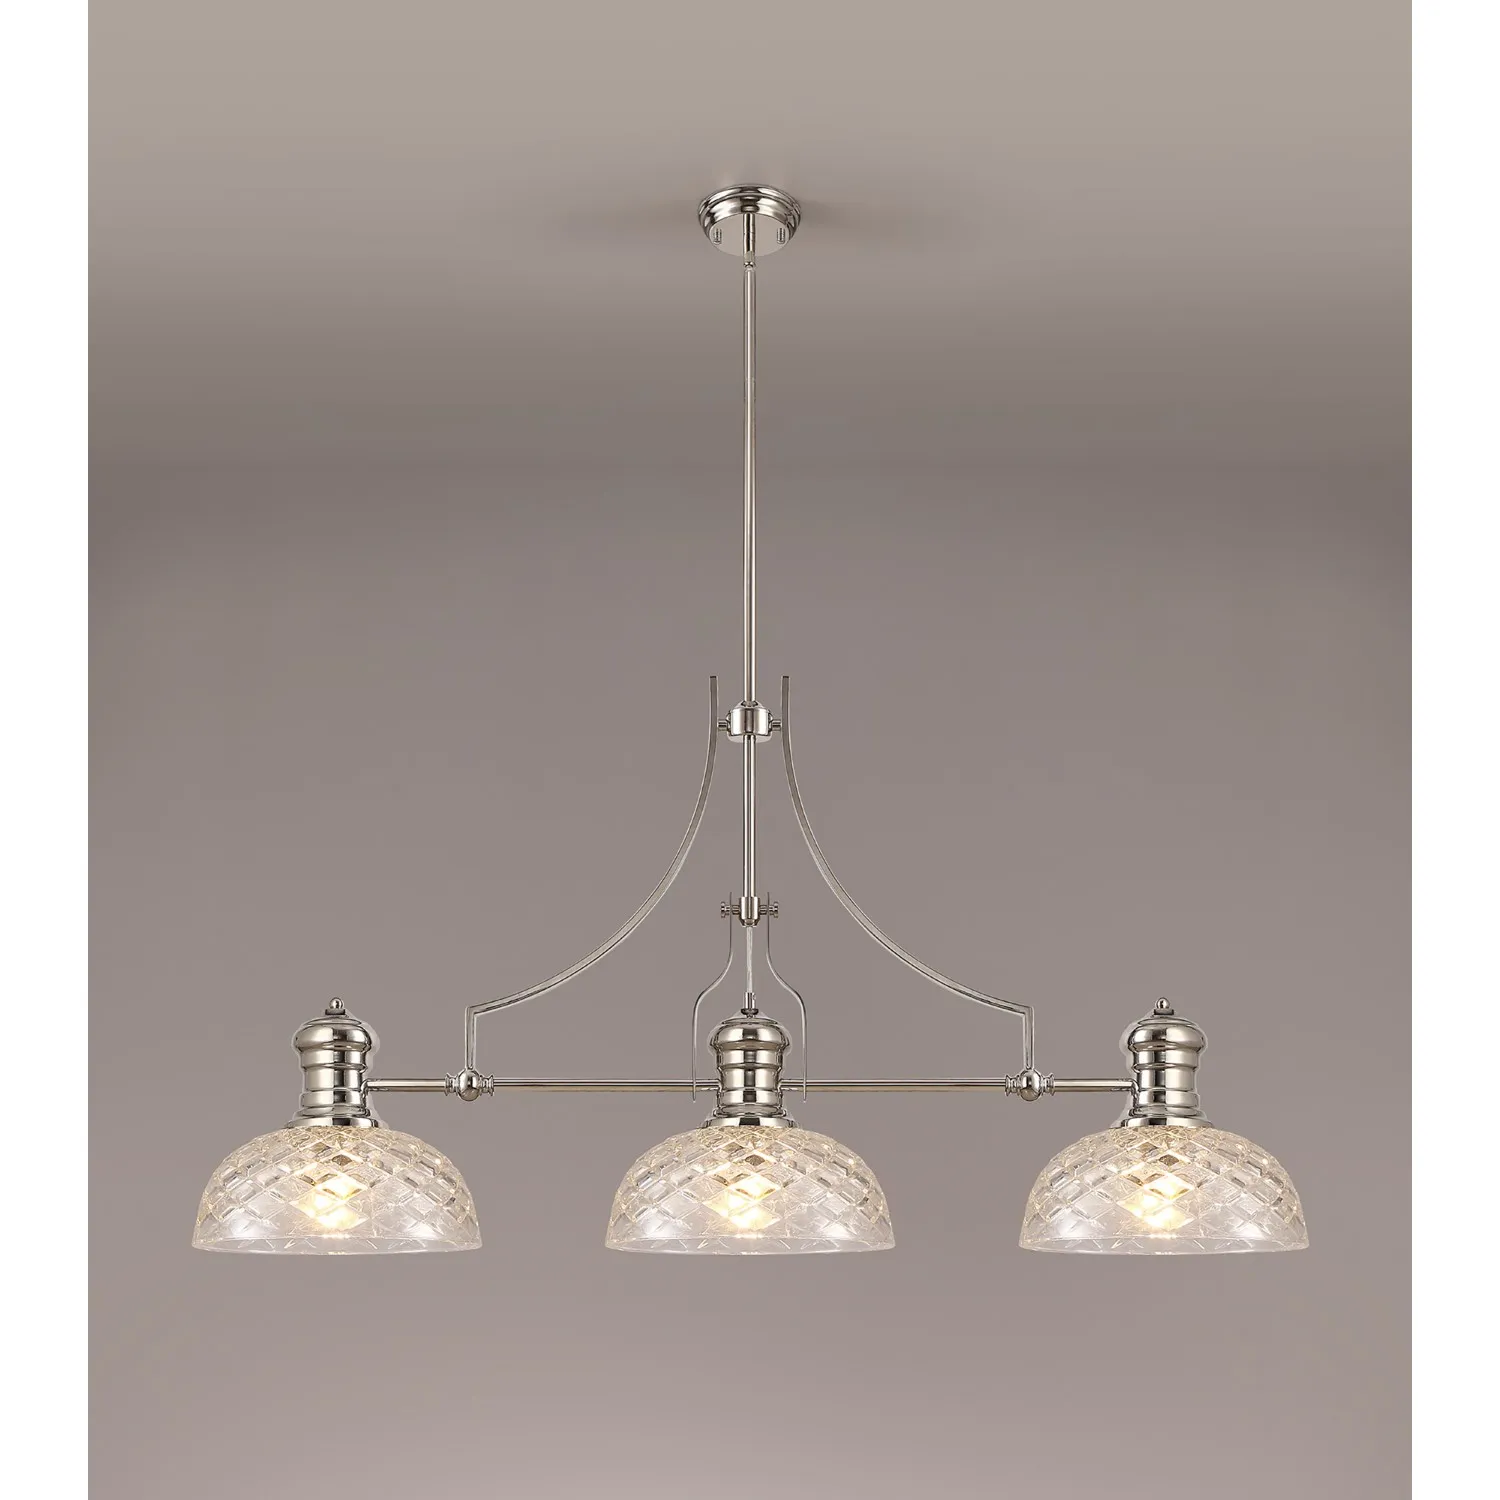 Sandy Linear Pendant With 30cm Flat Round Patterned Shade, 3 x E27, Polished Nickel Clear Glass